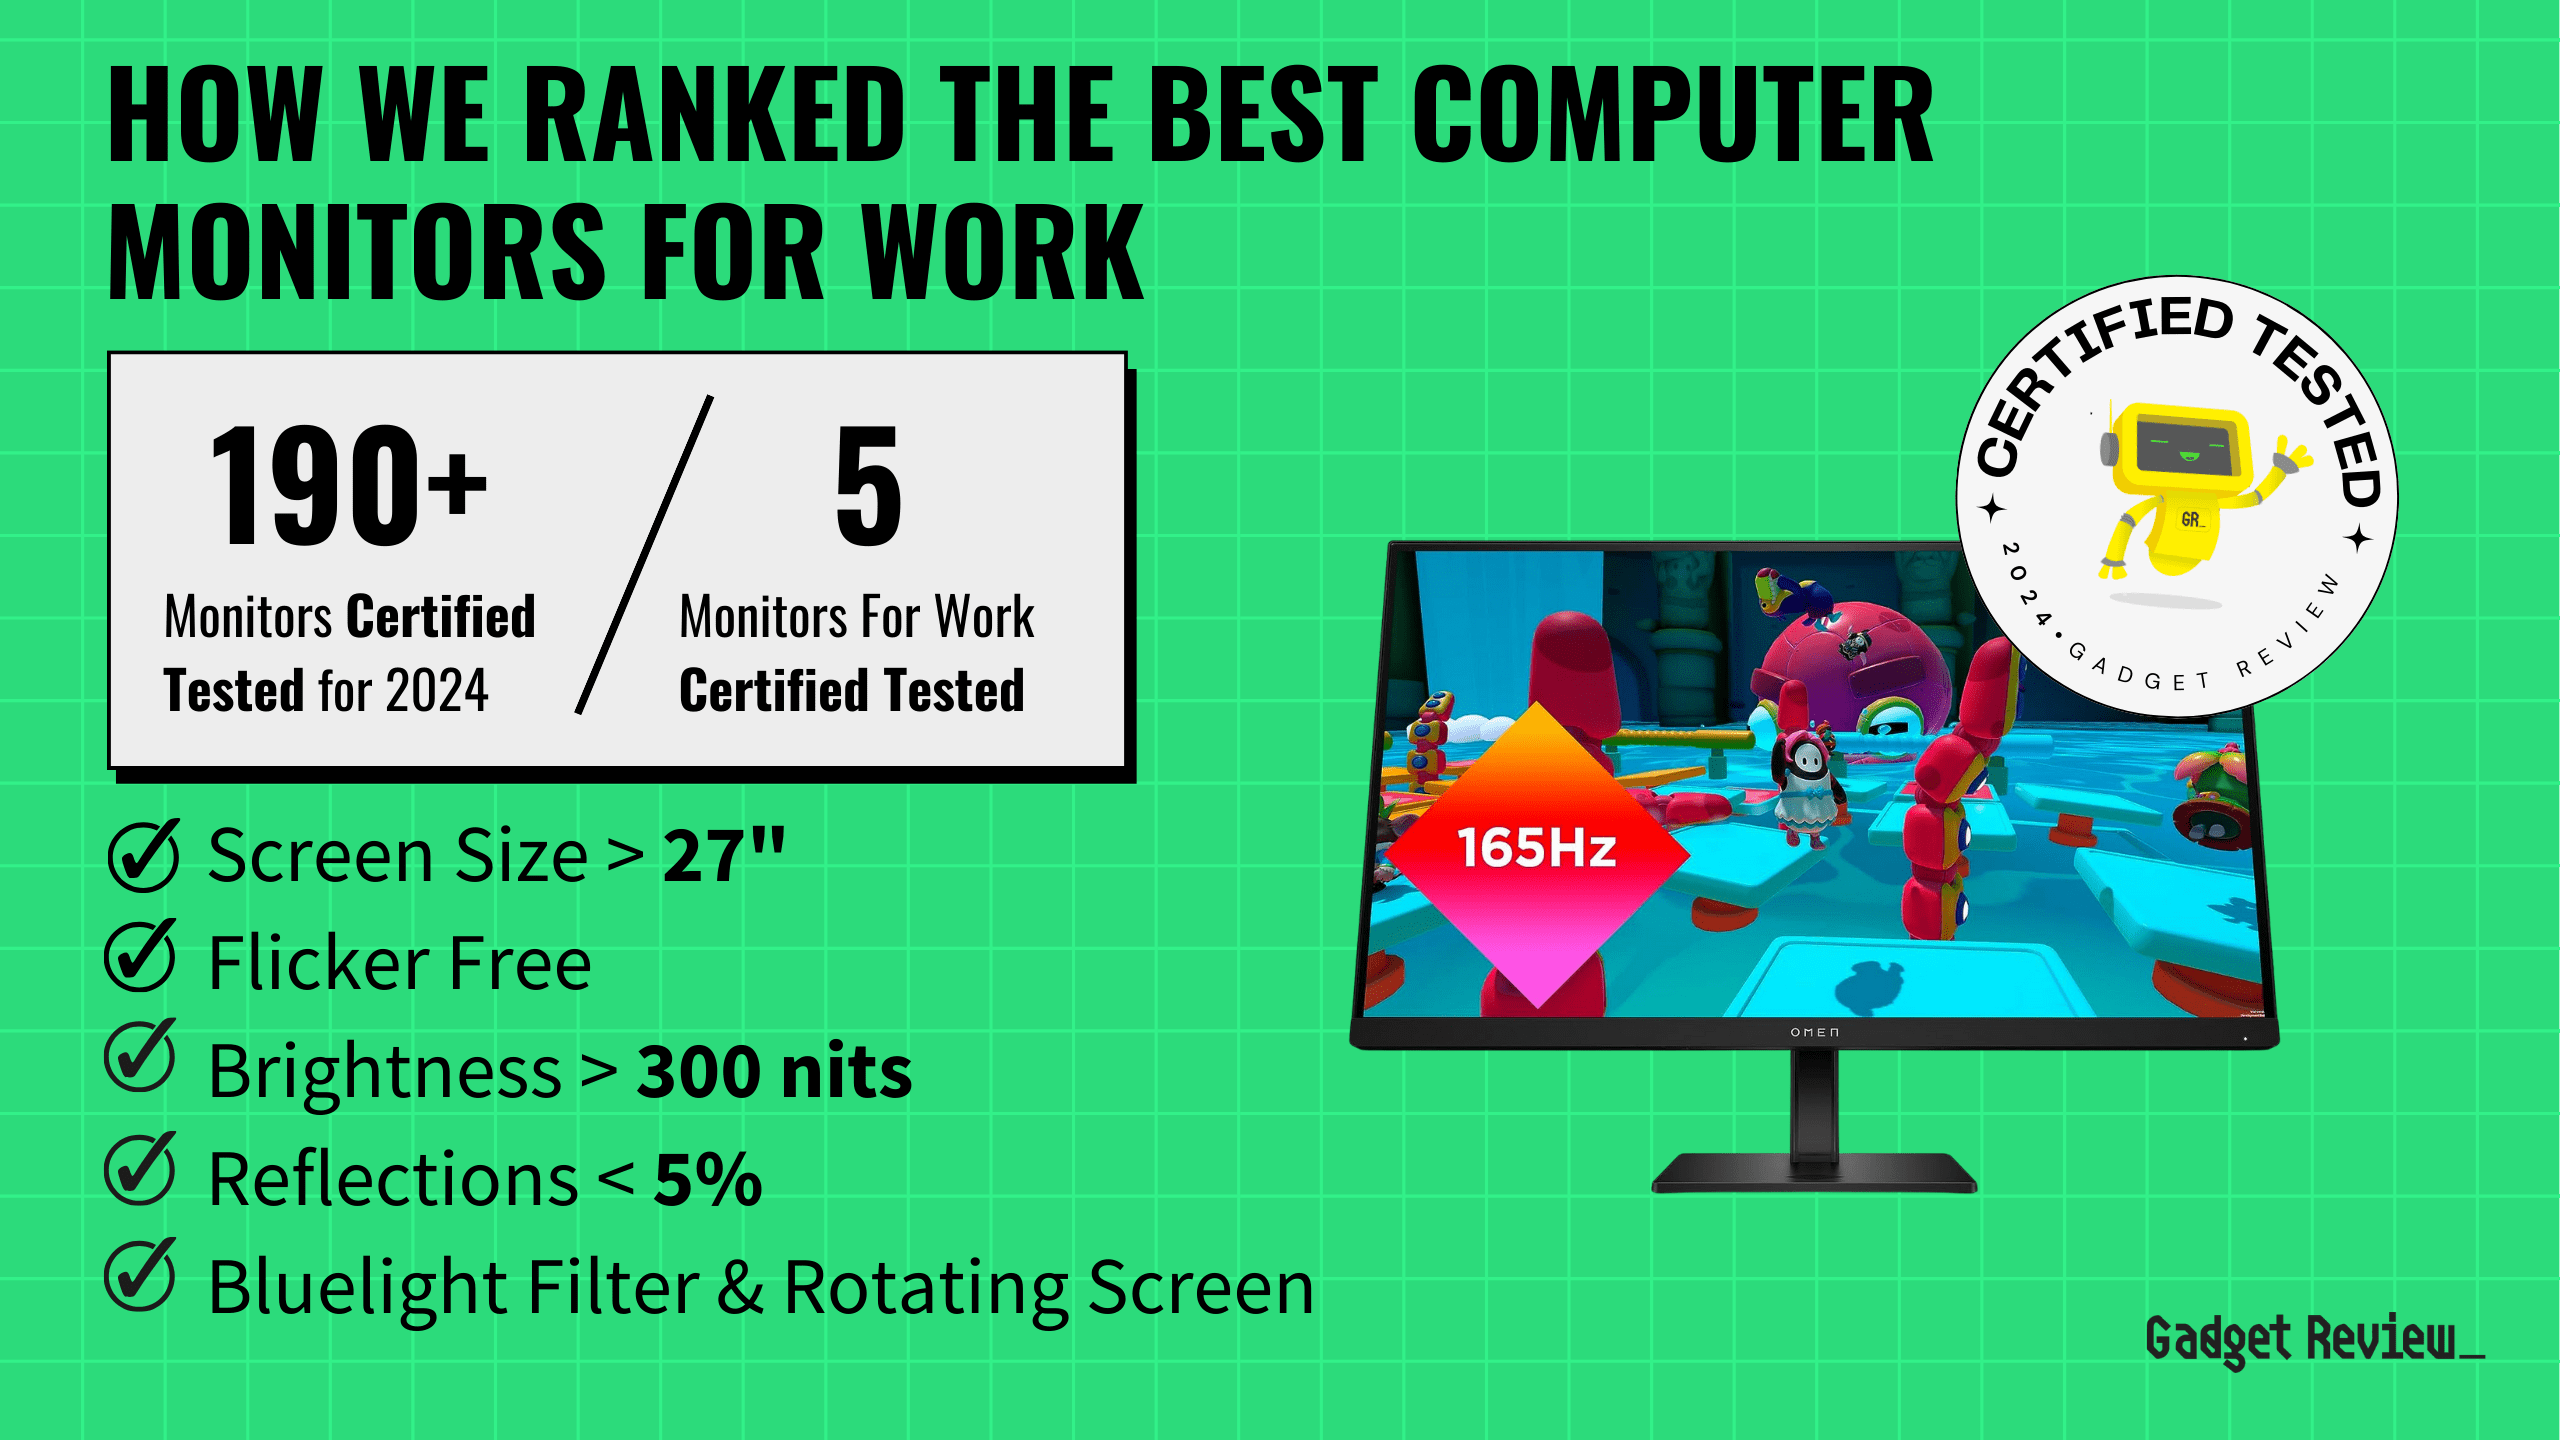 best computer monitors for work guide that shows the top best computer monitor model